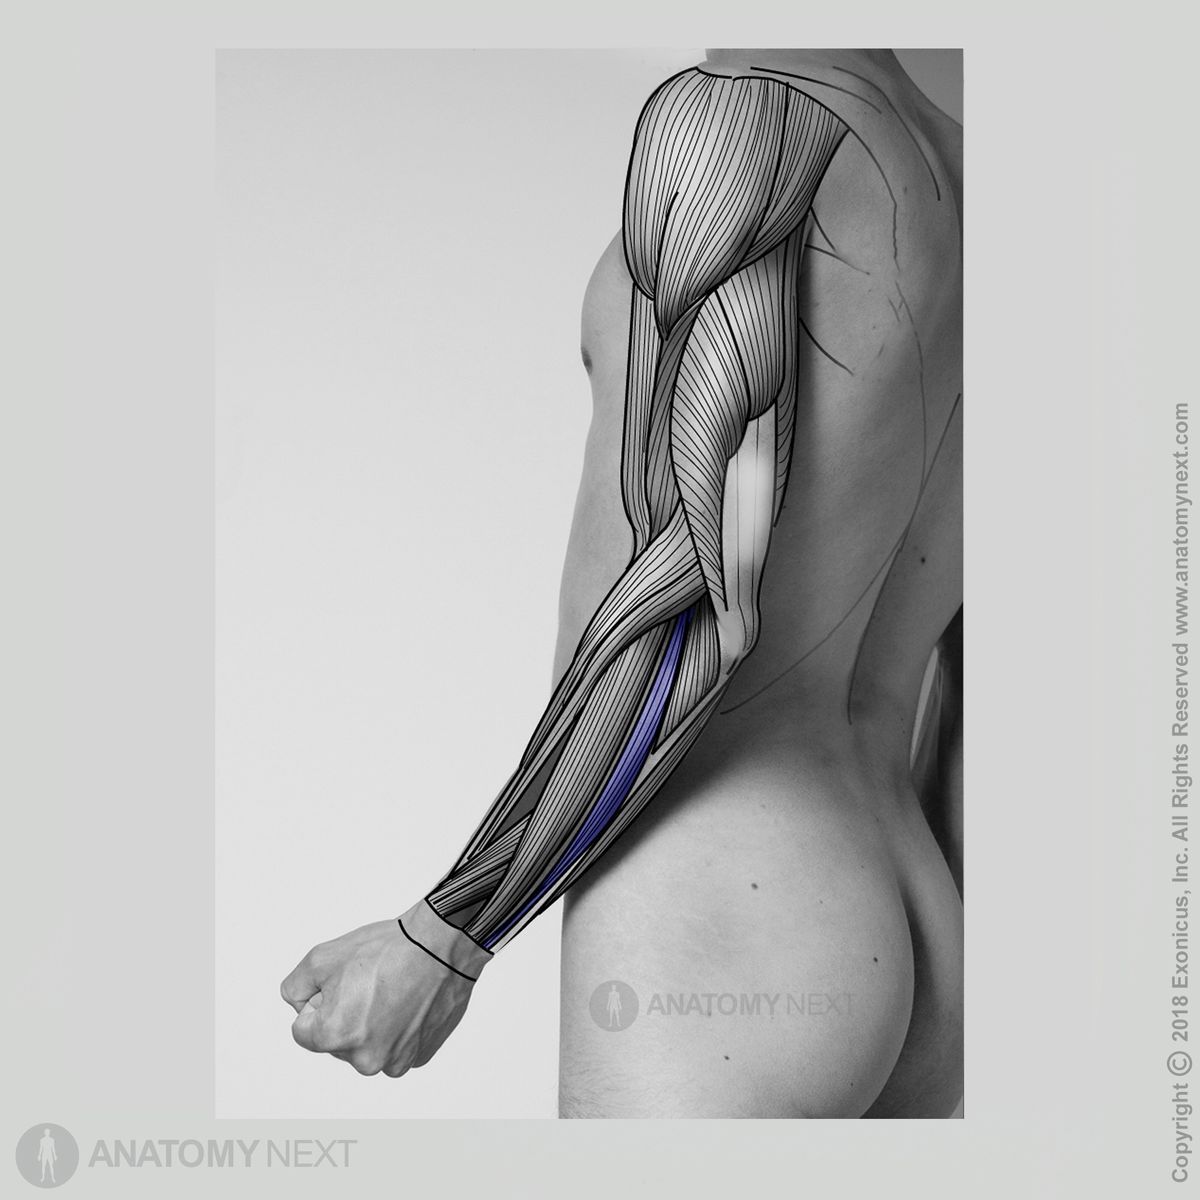 Extensor carpi ulnaris, Forearm muscles, Muscles of the forearm, Posterior compartment muscles, Posterior compartment of forearm muscles, Extensors, Extensor muscles, Human arm, Human muscles